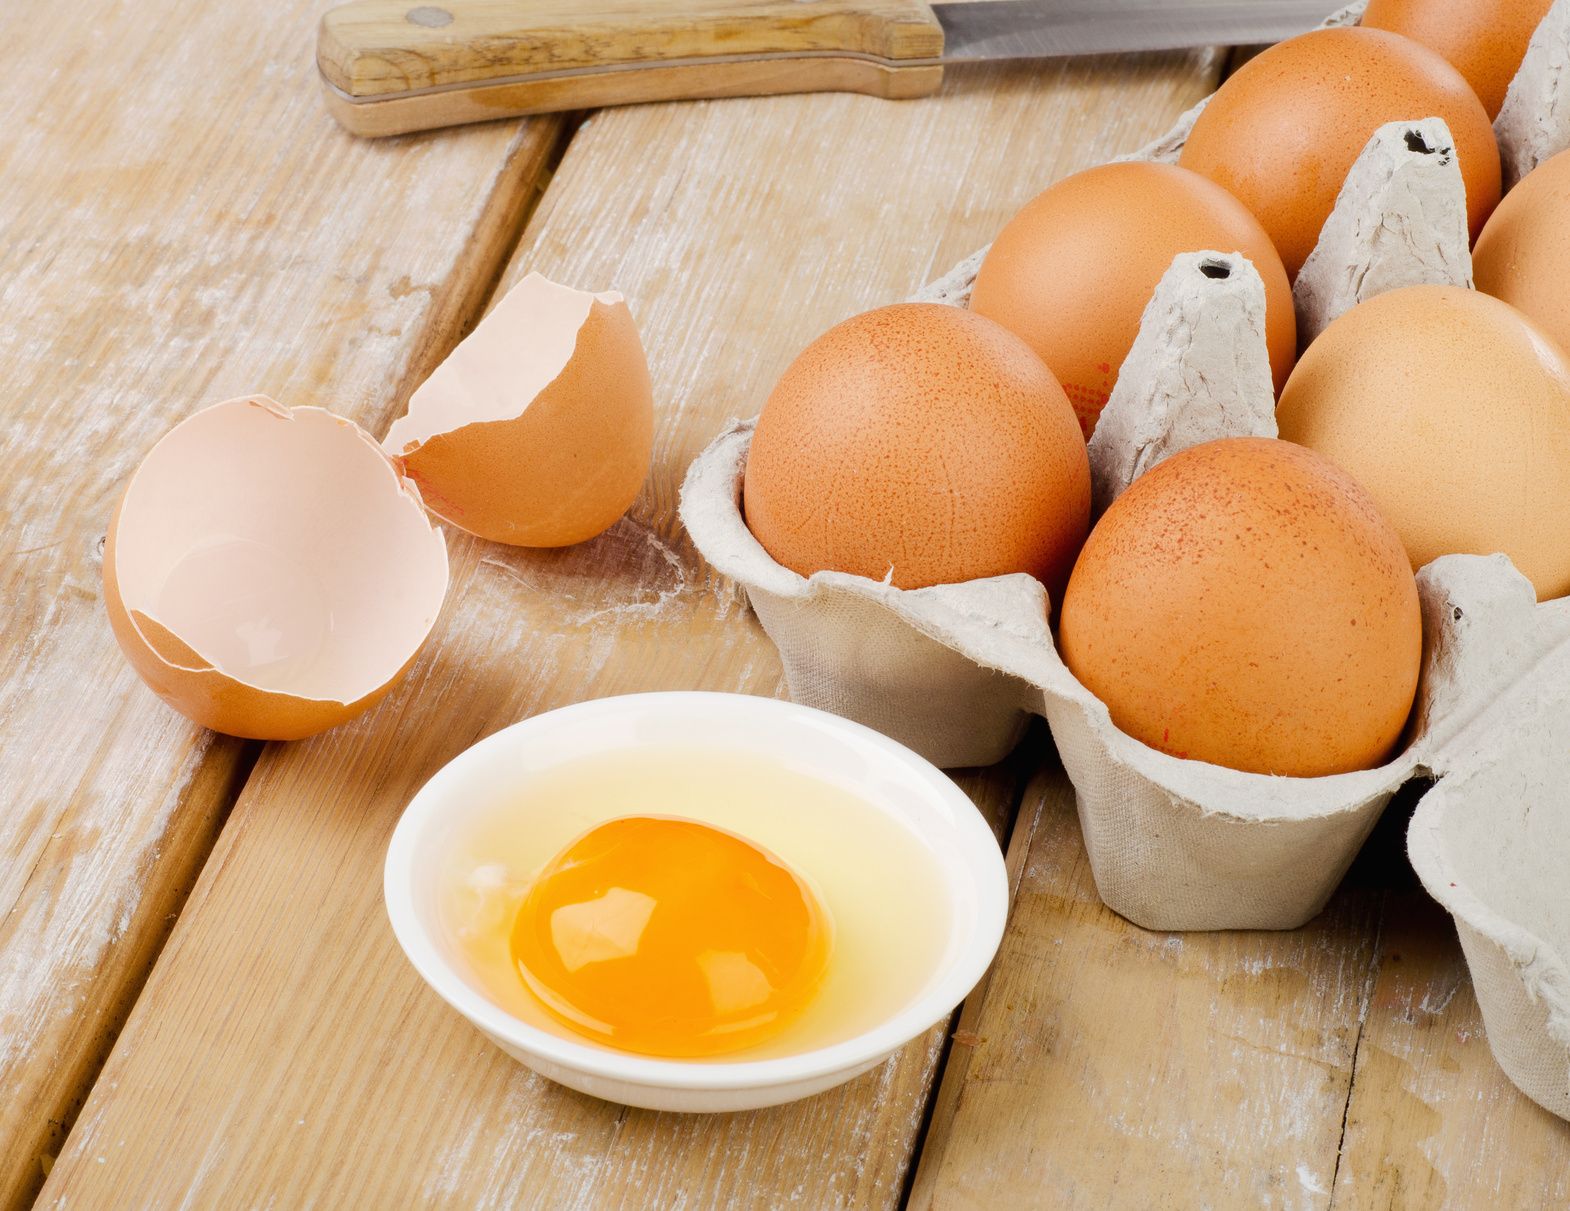 Egg Preparations Market Consumption Analysis, Business Overview and Upcoming Trends 2032